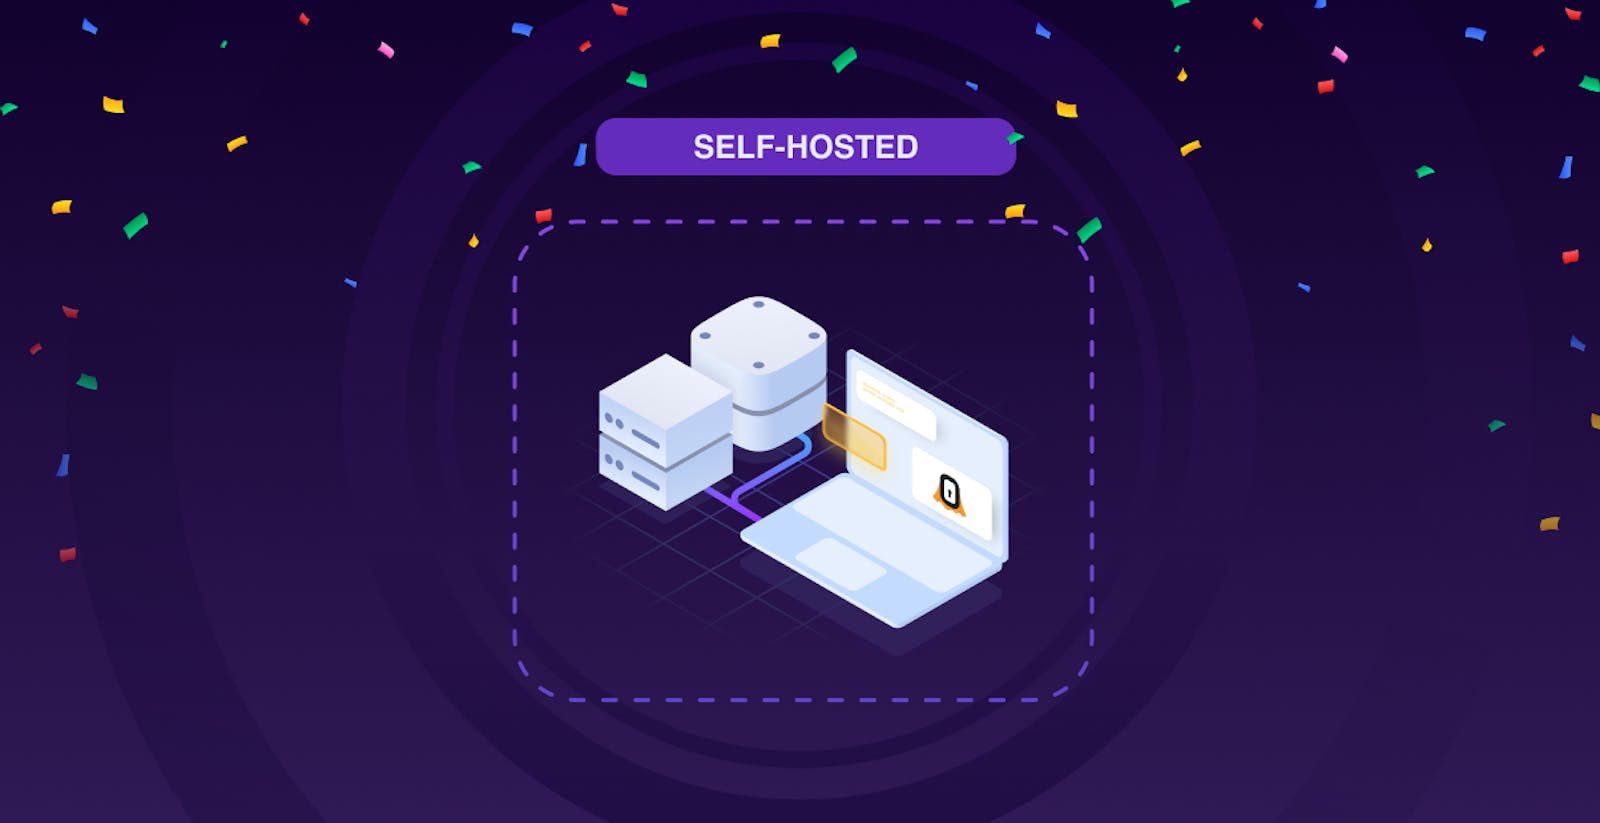 So You Want to Self-Host? A Beginner's Guide from a Frazzled DevOps Guy 👨‍💻